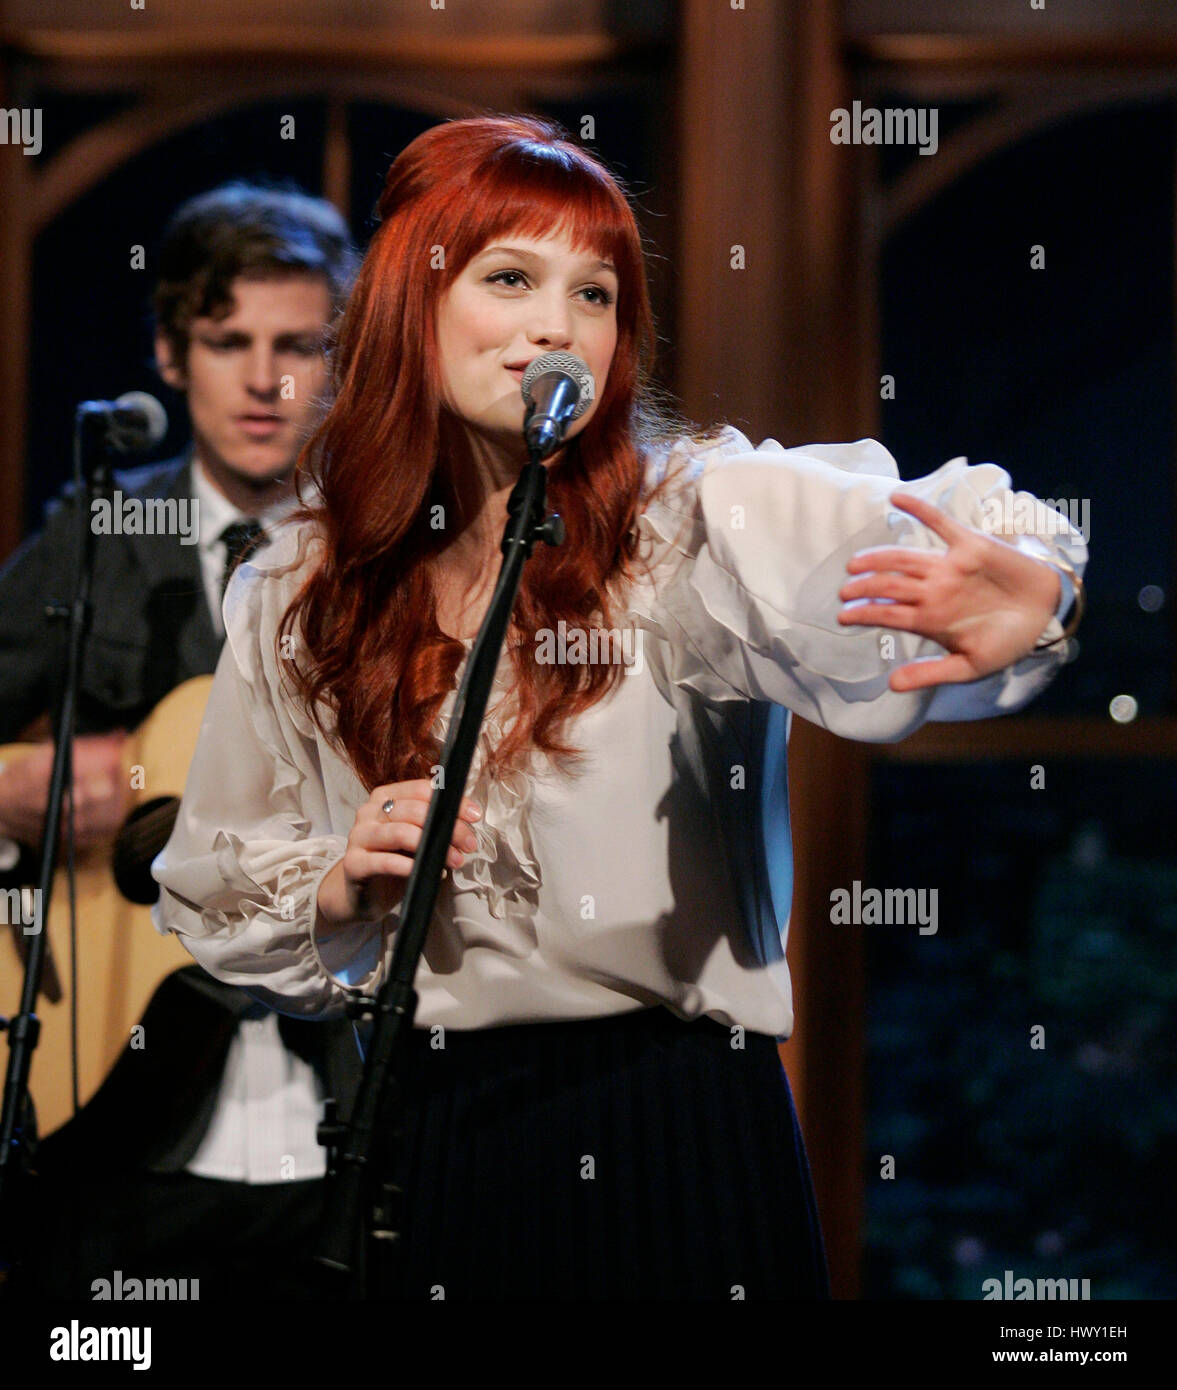 Alison Sudo with her band, 'A Fine Frenzy' performs during a segment of the 'Late Late Show with Craig  Ferguson' at CBS Television City in Los Angeles, California on September 29, 2009. Photo by Francis Specker Stock Photo